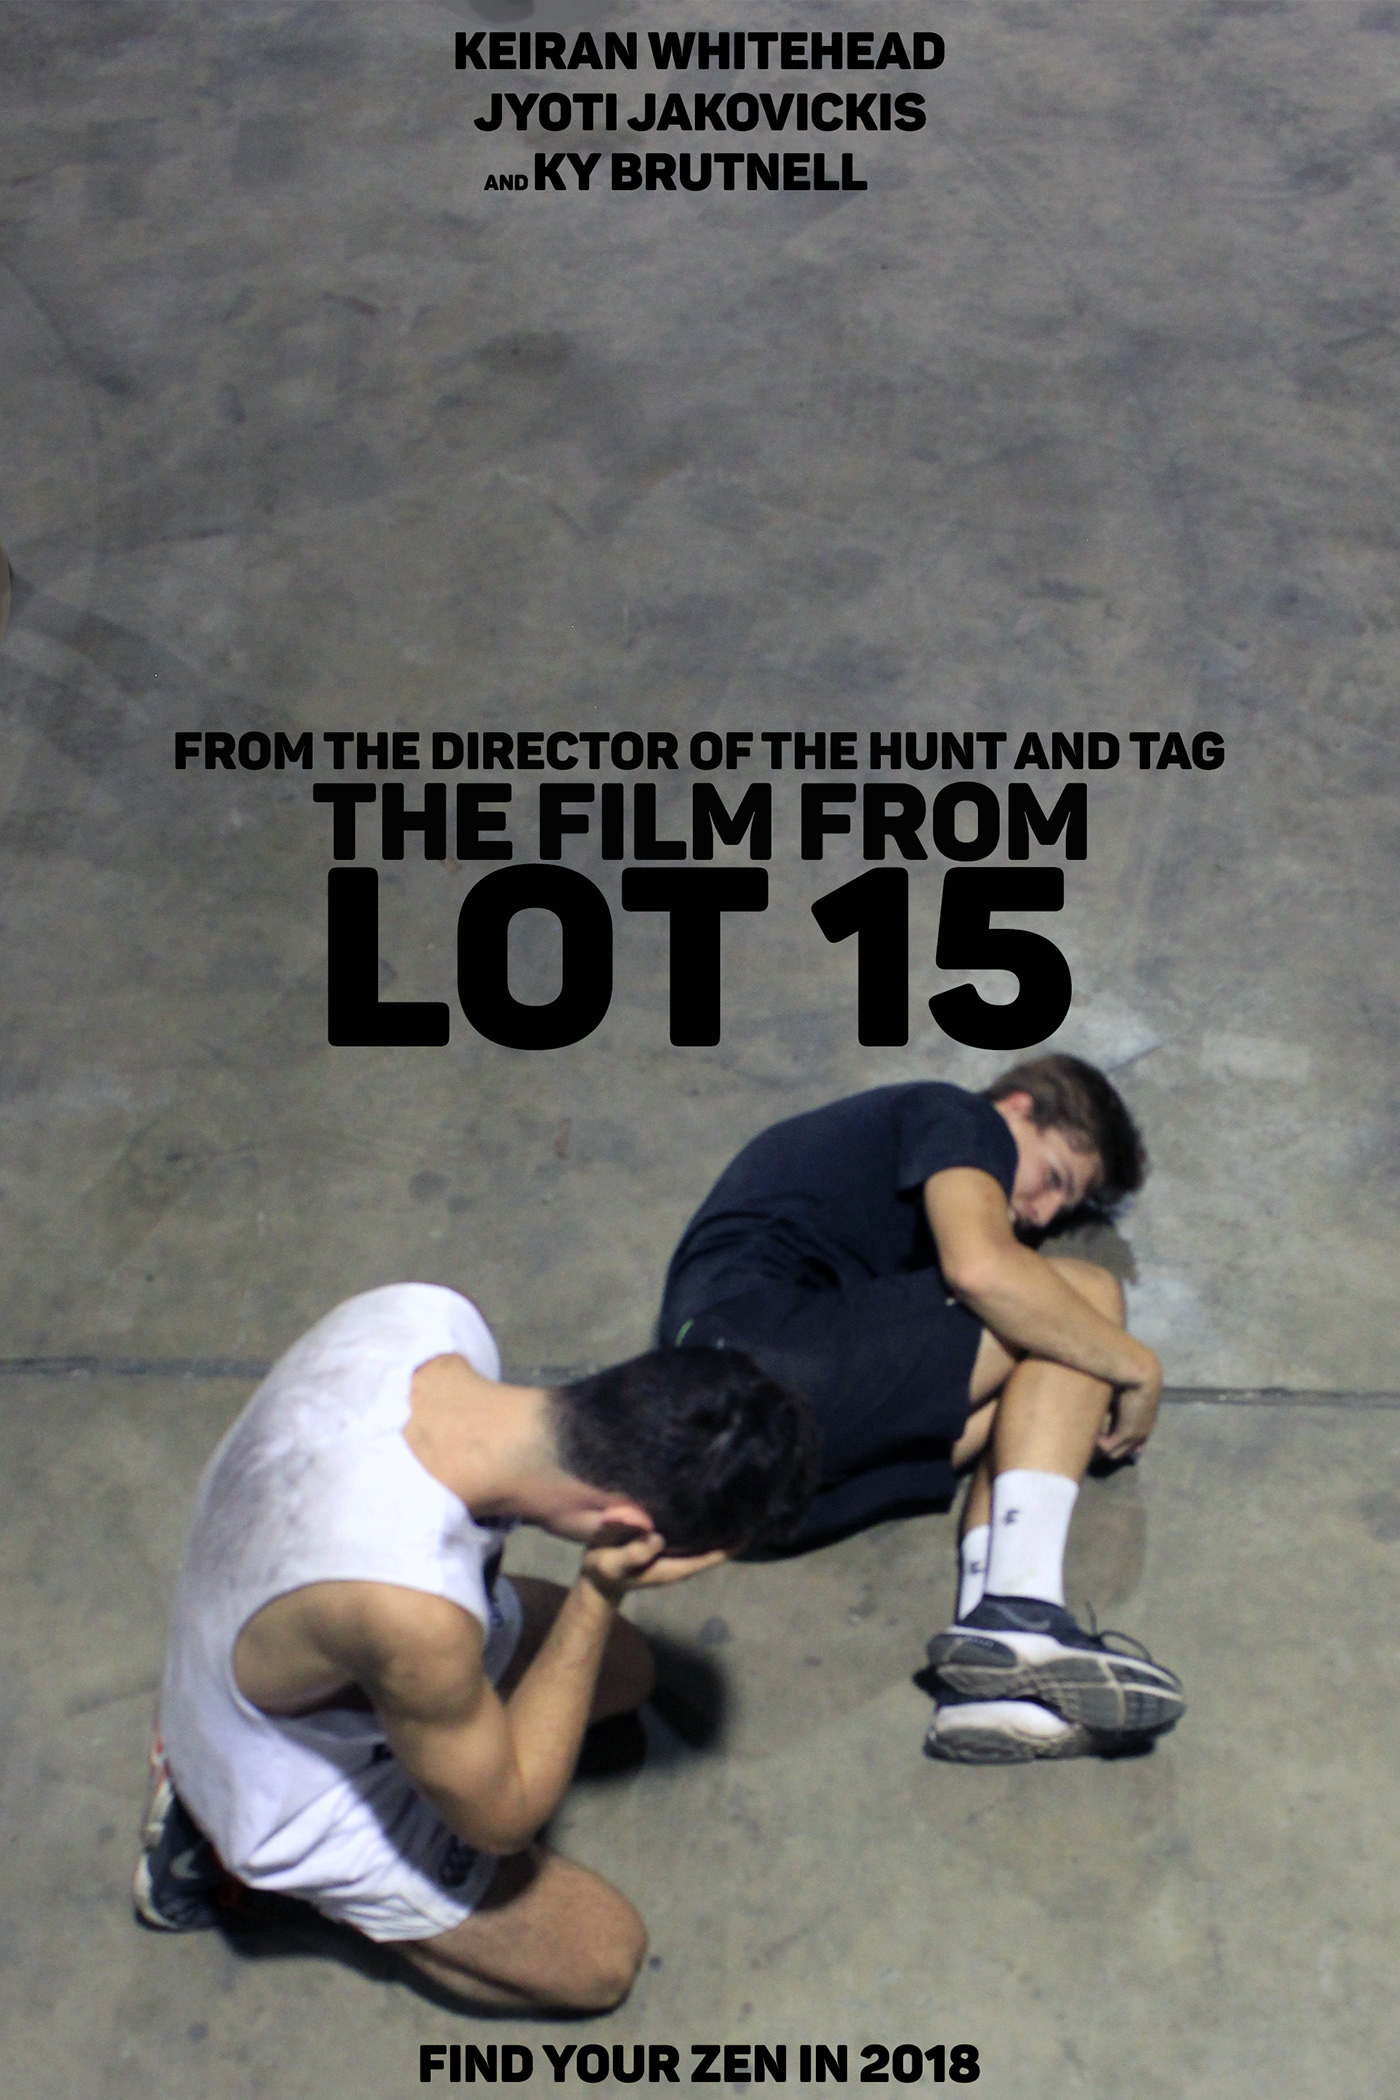 The Film from Lot 15